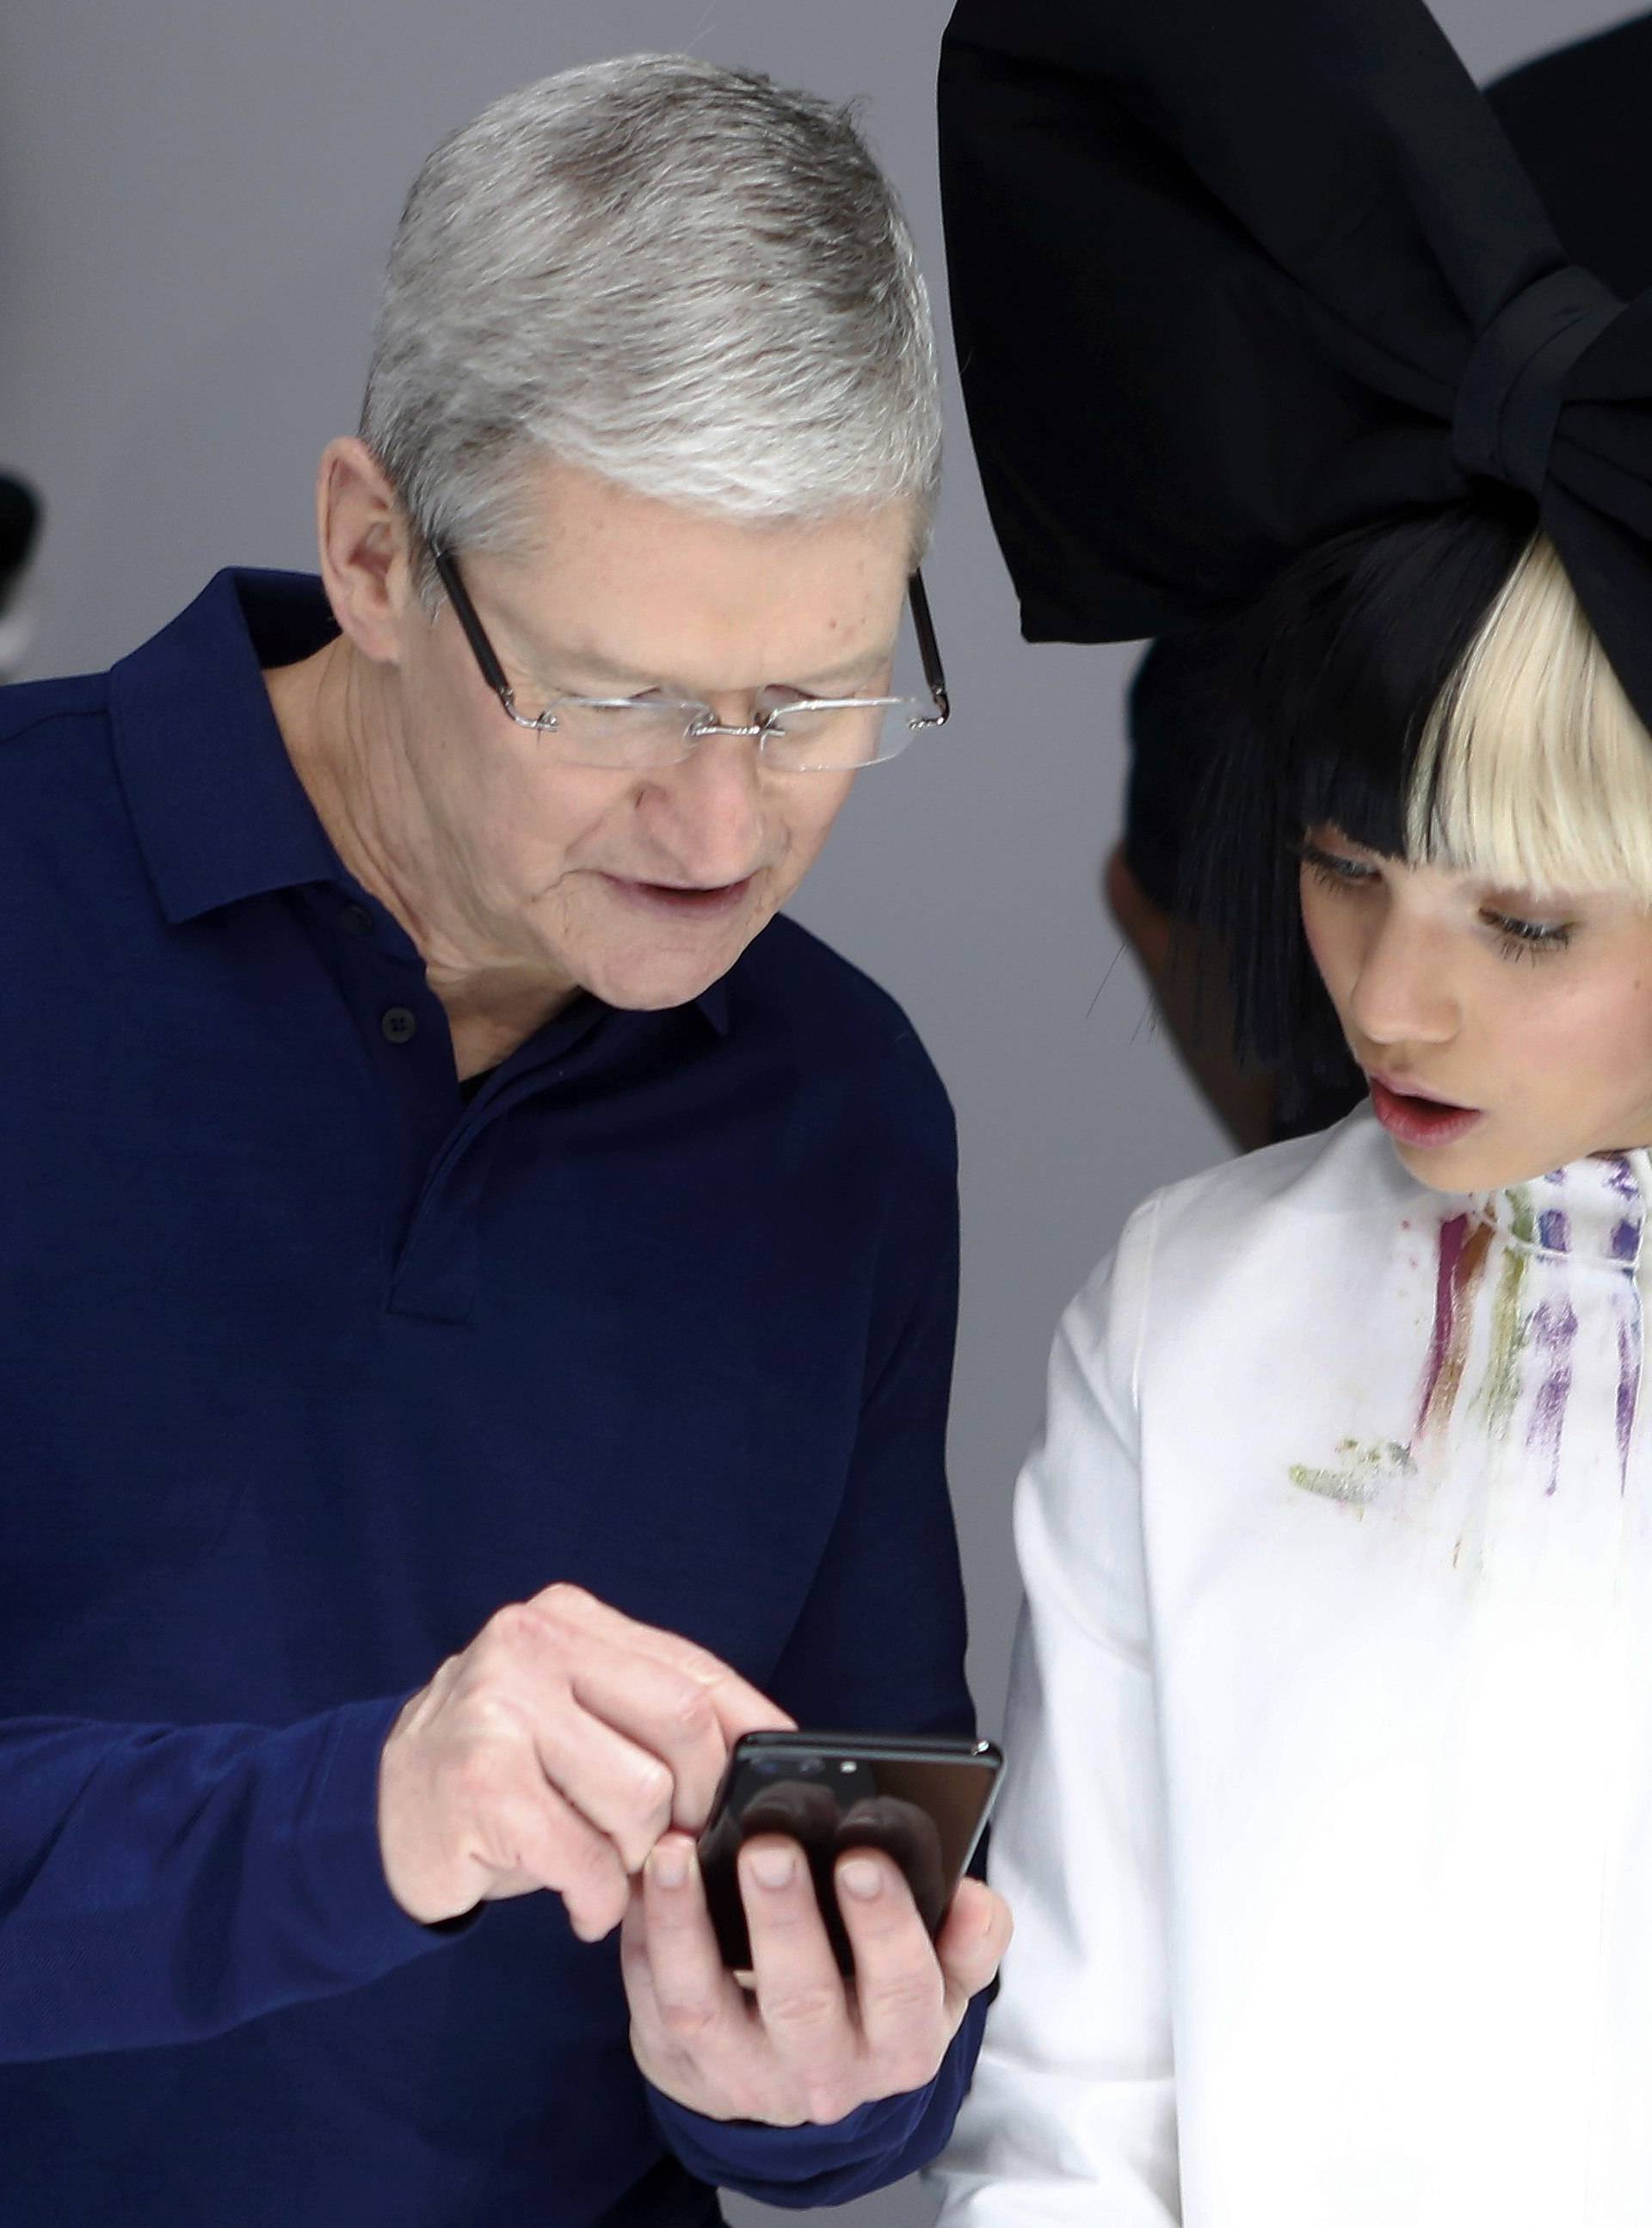 Tim Cook shows Maddie Ziegler an iPhone 7 during an Apple media event in San Francisco